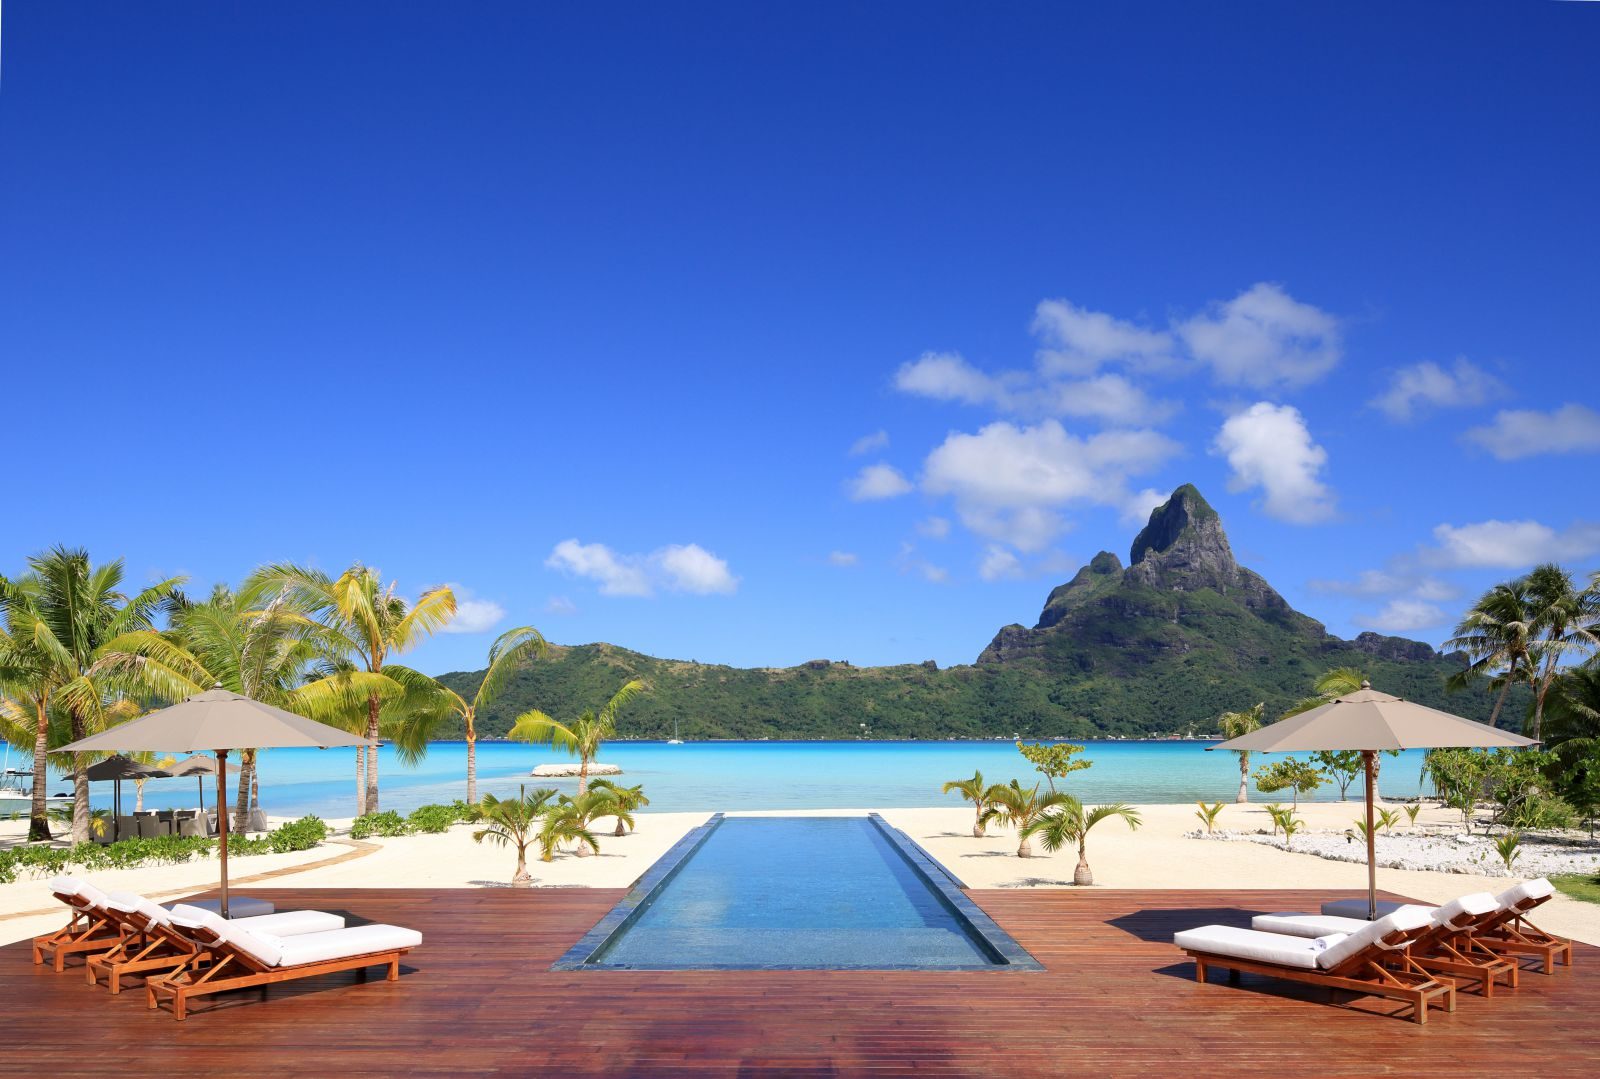 8 Highly Luxurious Islands You Must Visit With Your Family